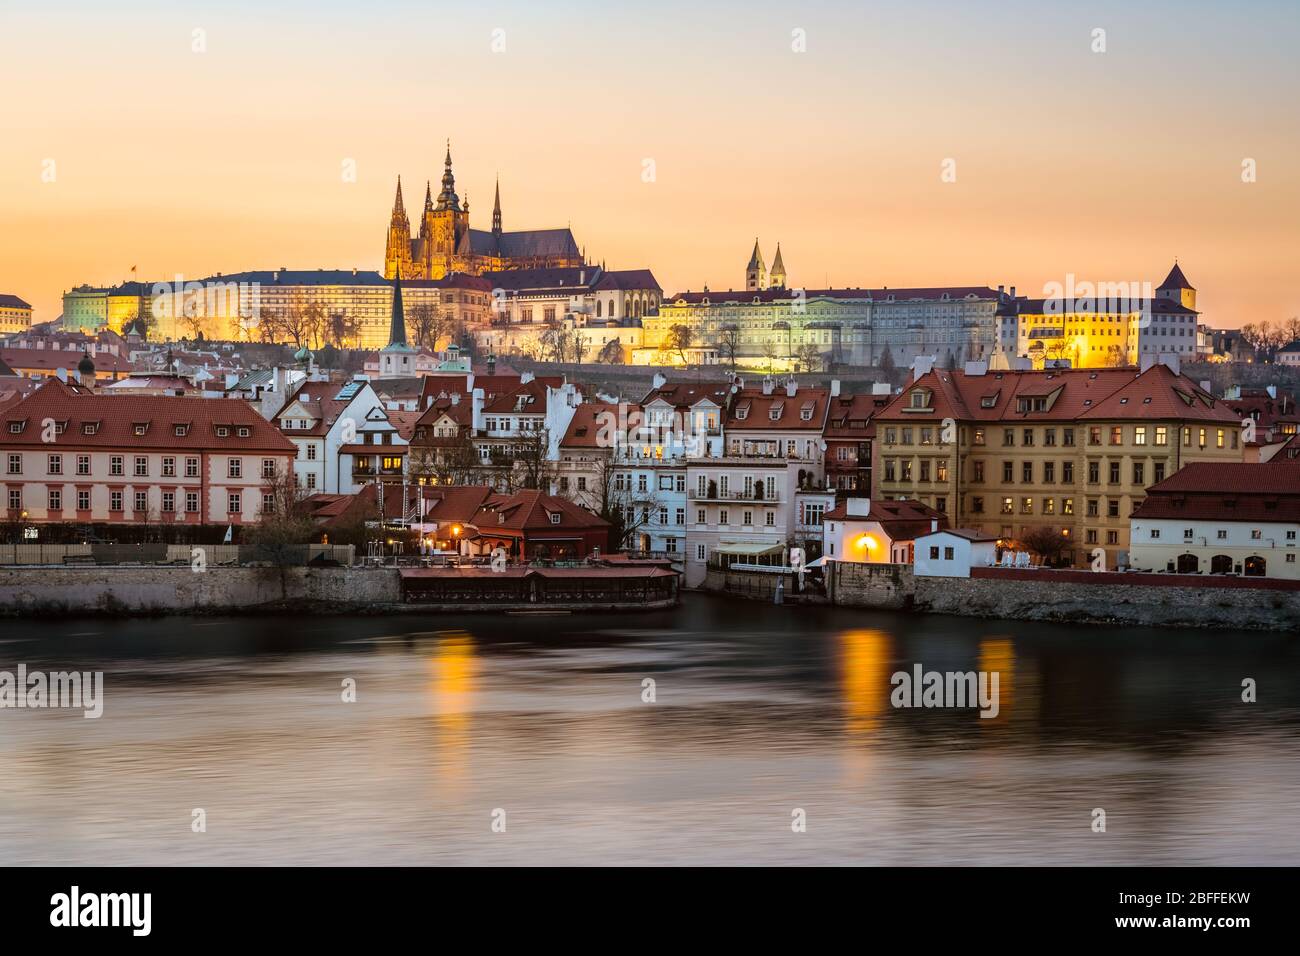 The Prague castle panorama during the golden hour from the Charles bridge, Prague, Czech Republic Stock Photo